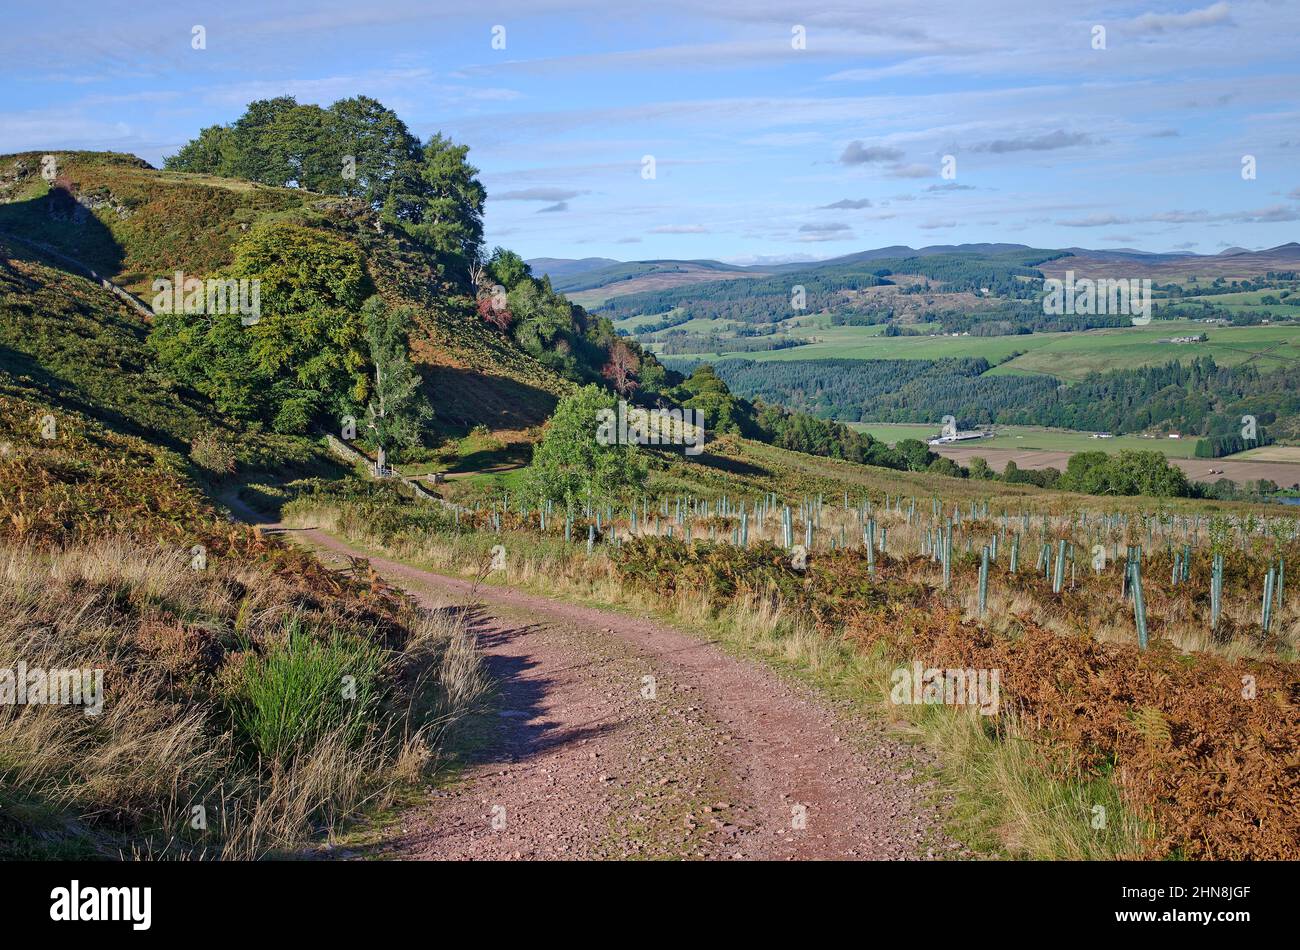 Moorland track on hillside above Tay valley, with views to hills across the valley, autumn, Tayside, Perthshire Scotland UK Stock Photo